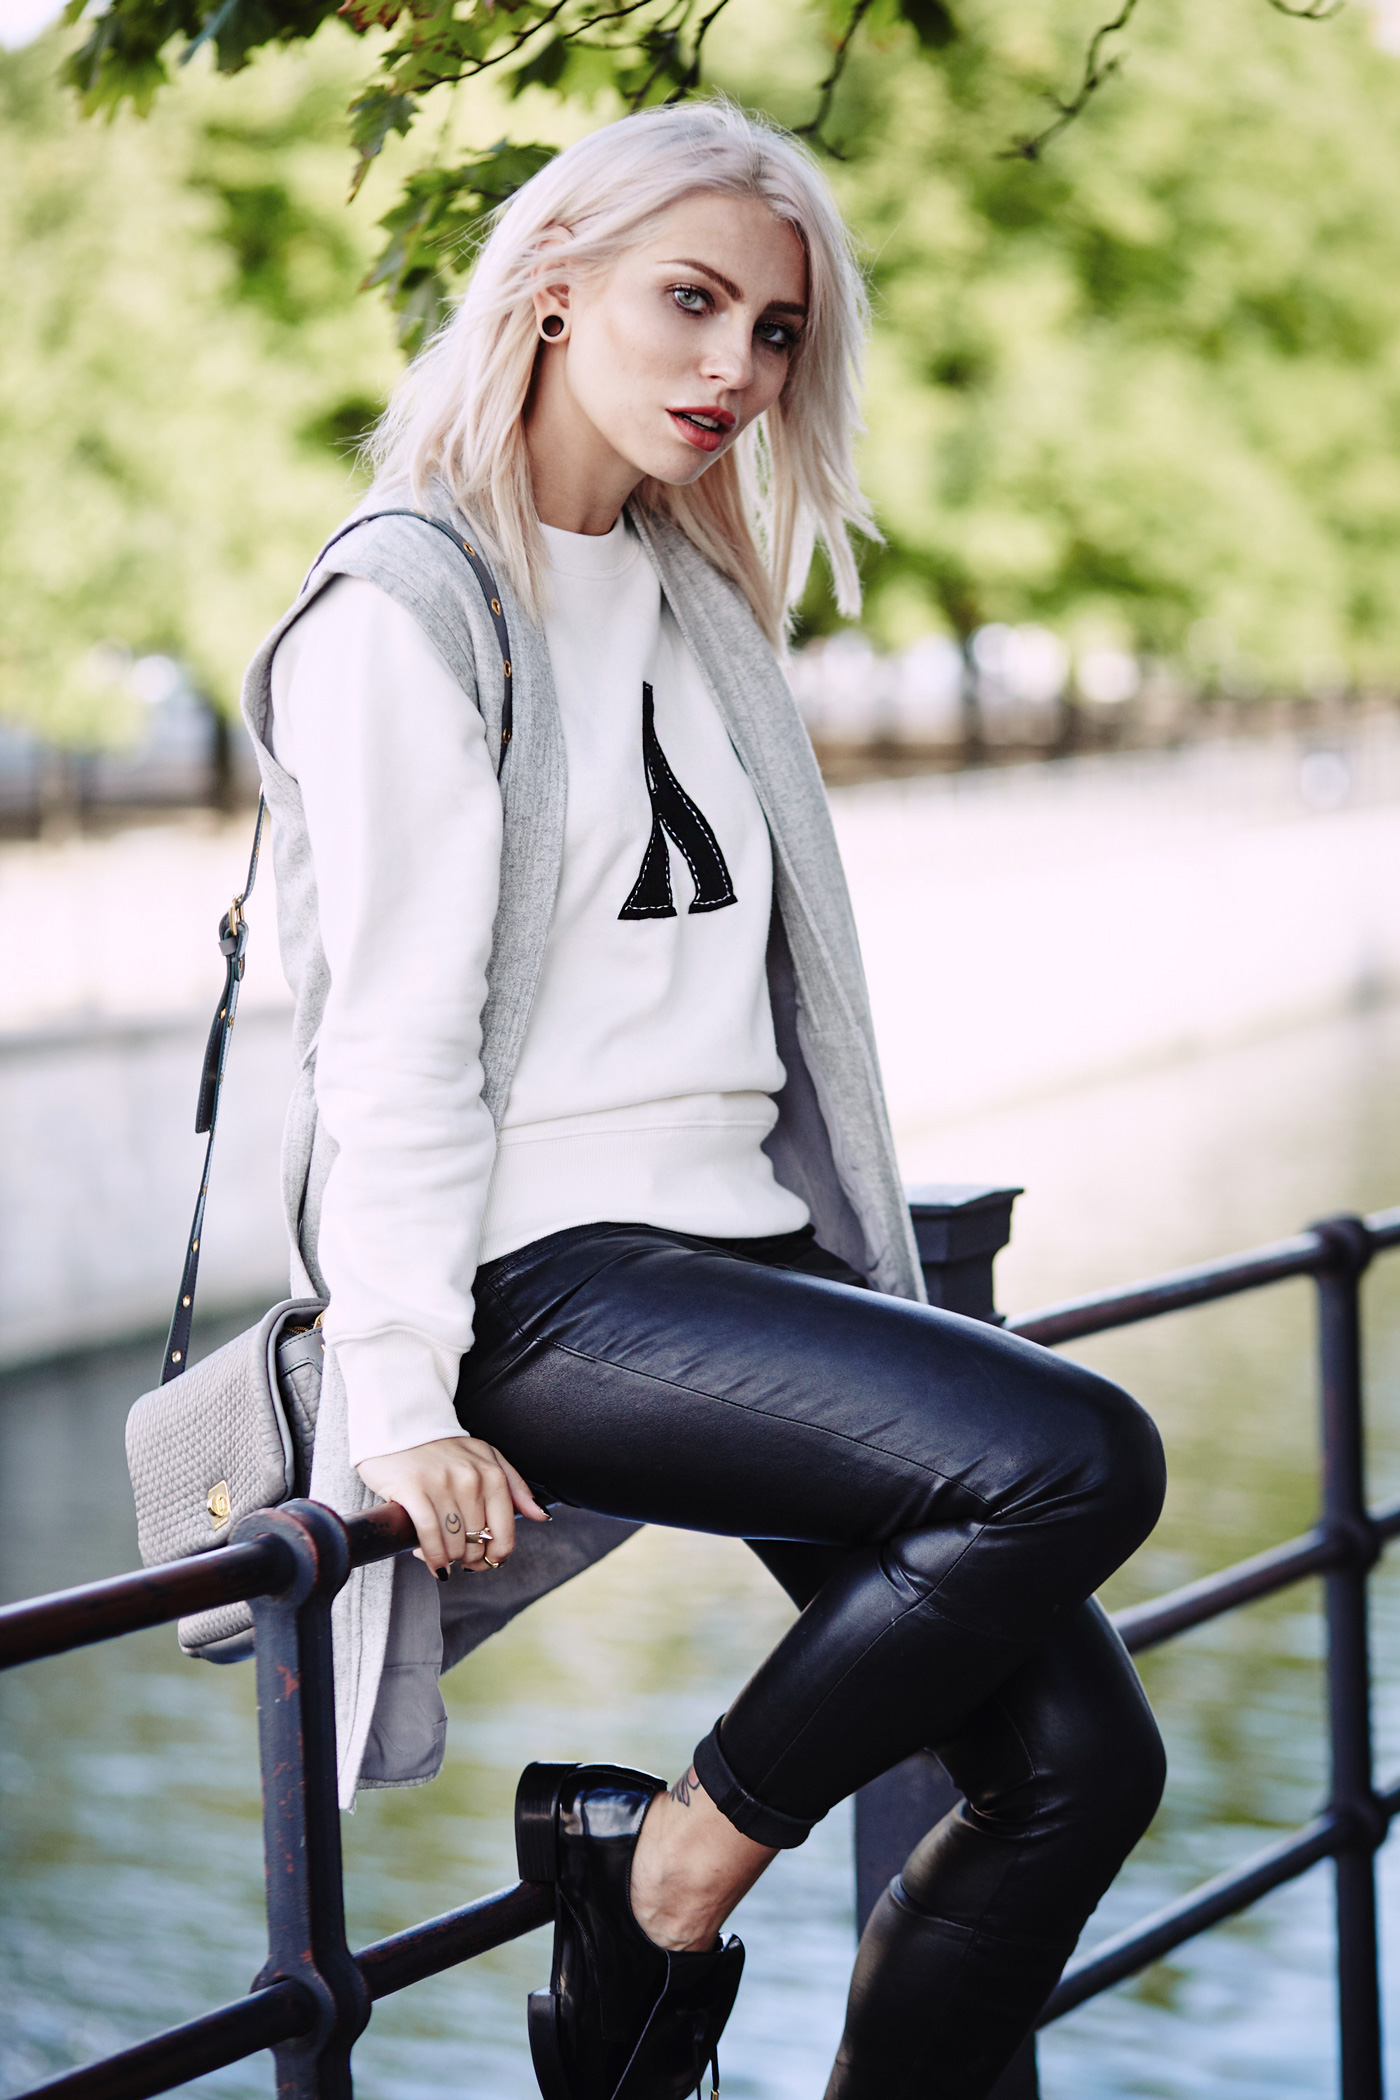 Casual College Outfit | Masha Sedgwick is wearing a sweater from Alexa Chung for AG, black leather pants, grey Sonia Rykiel bag and grey Kala vest | Berlin street style